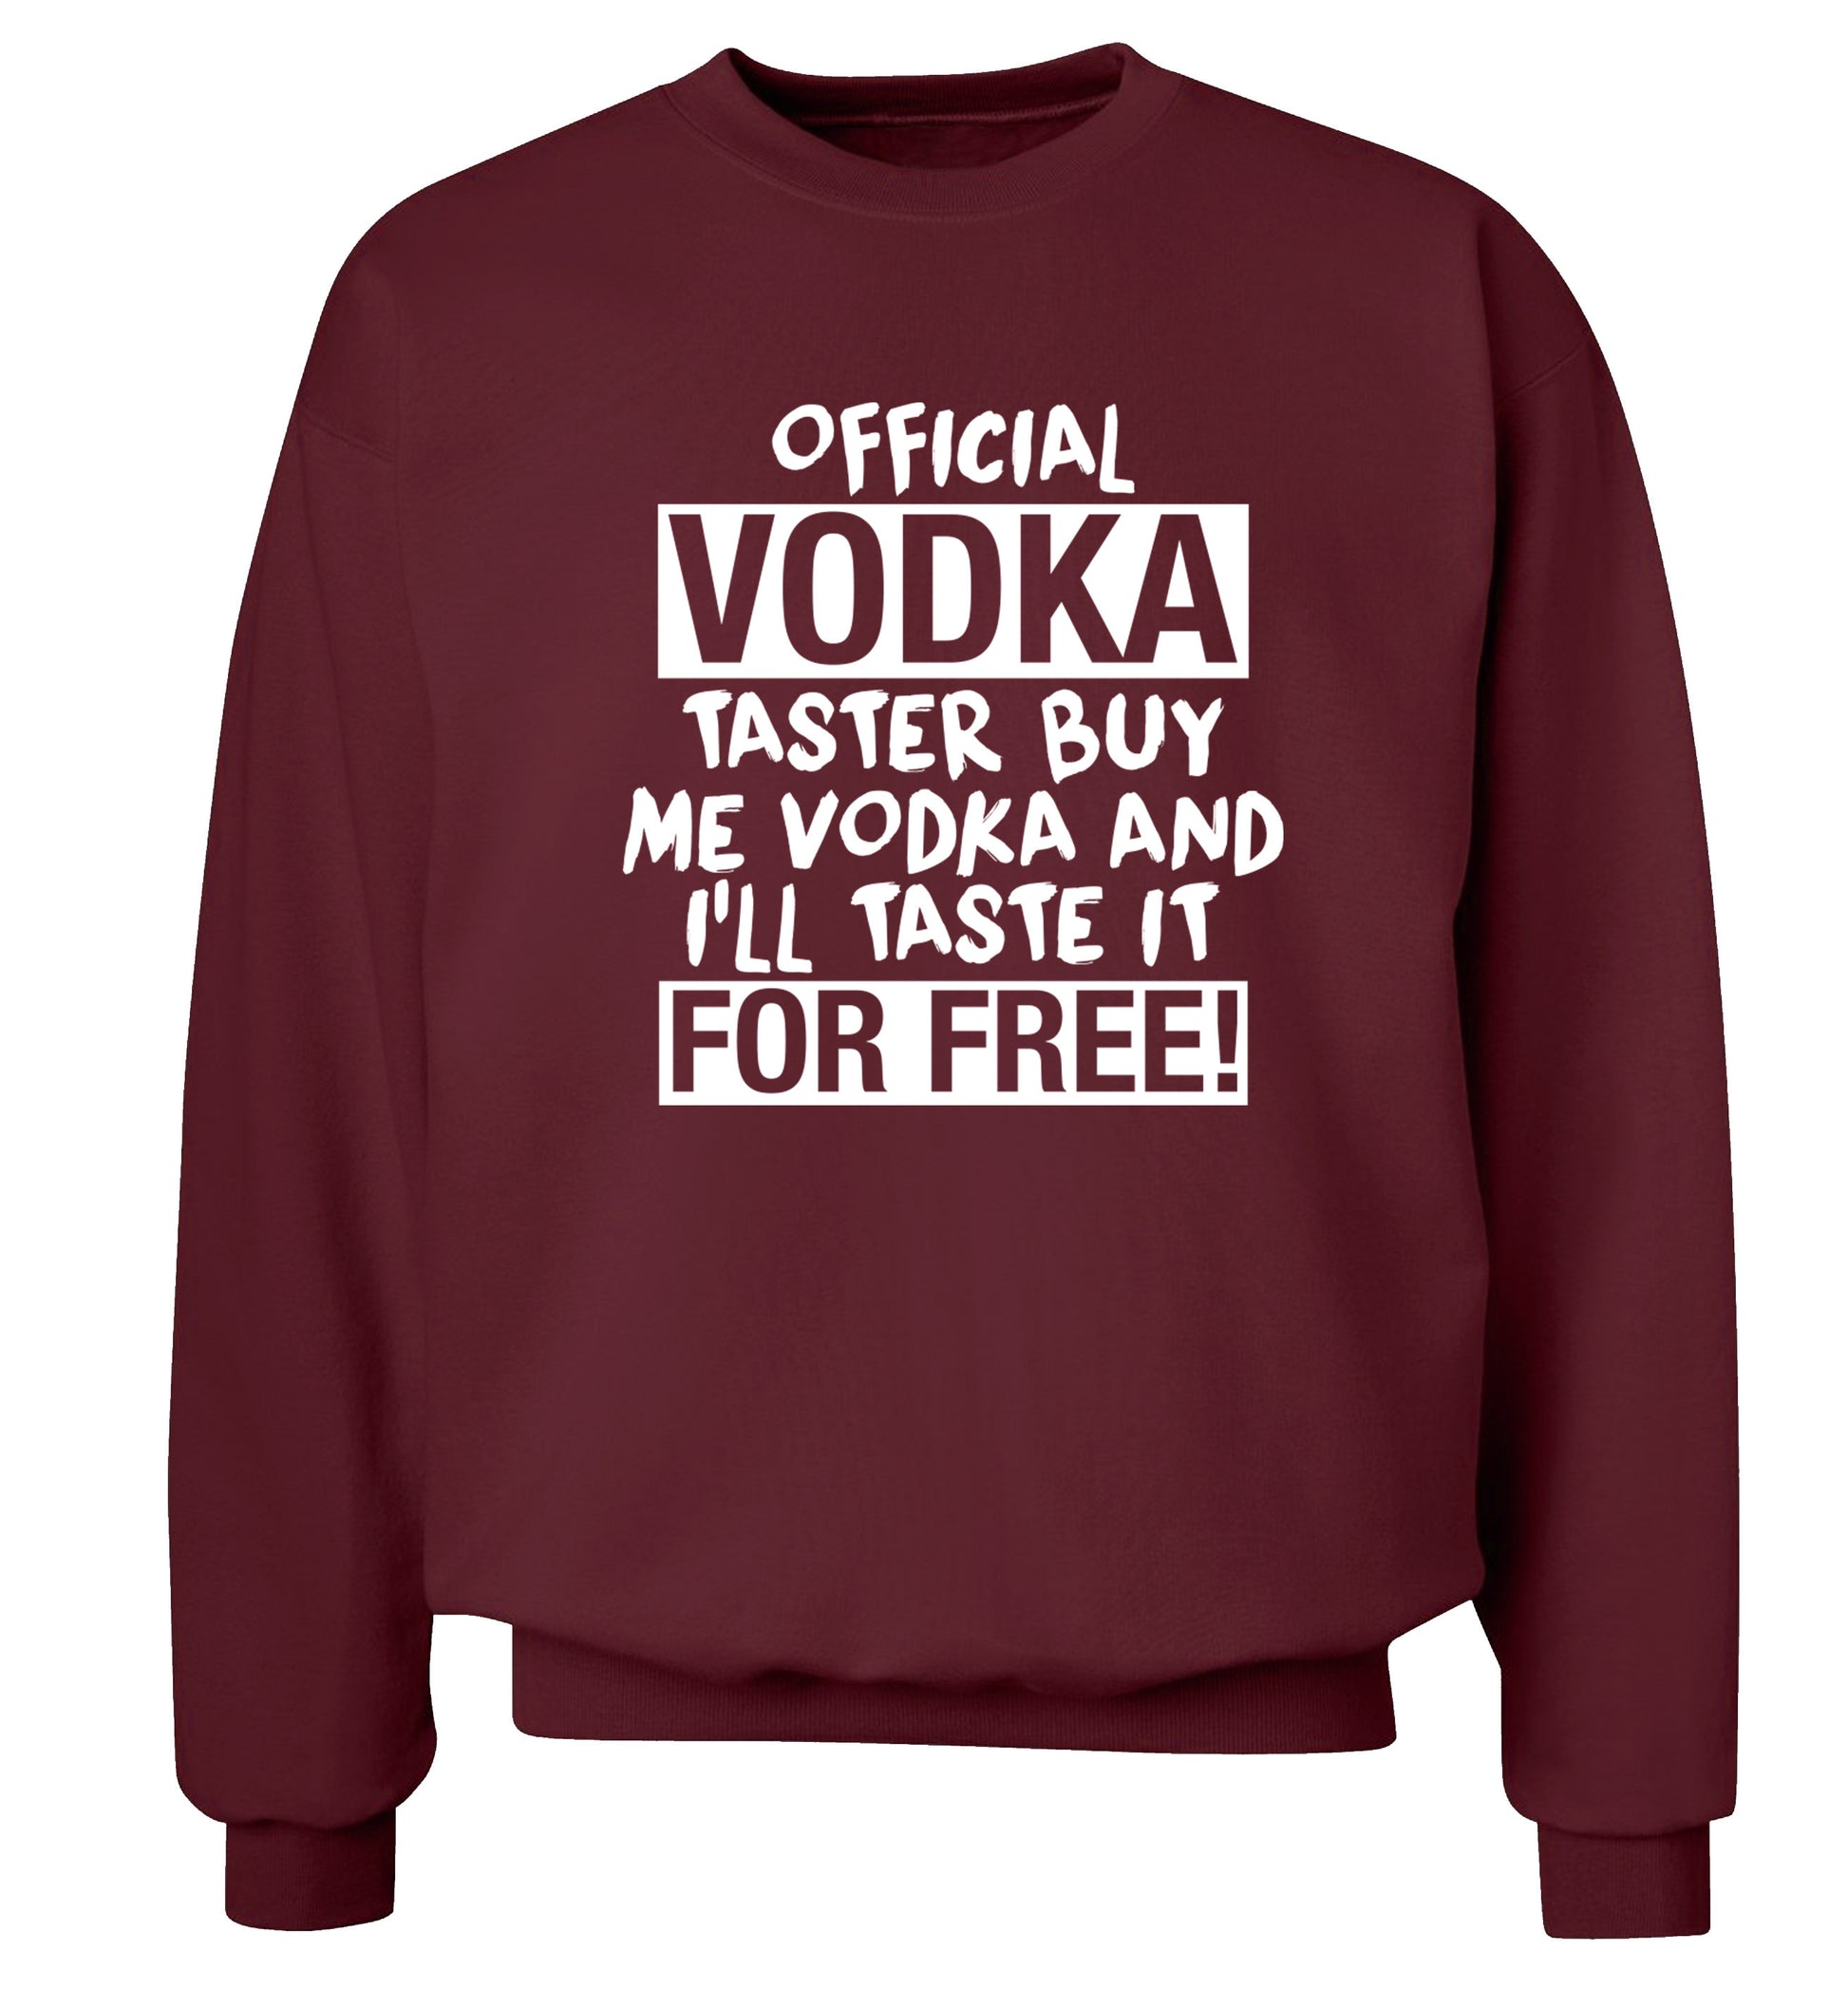 Official vodka taster buy me vodka and I'll taste it for free Adult's unisex maroon Sweater 2XL